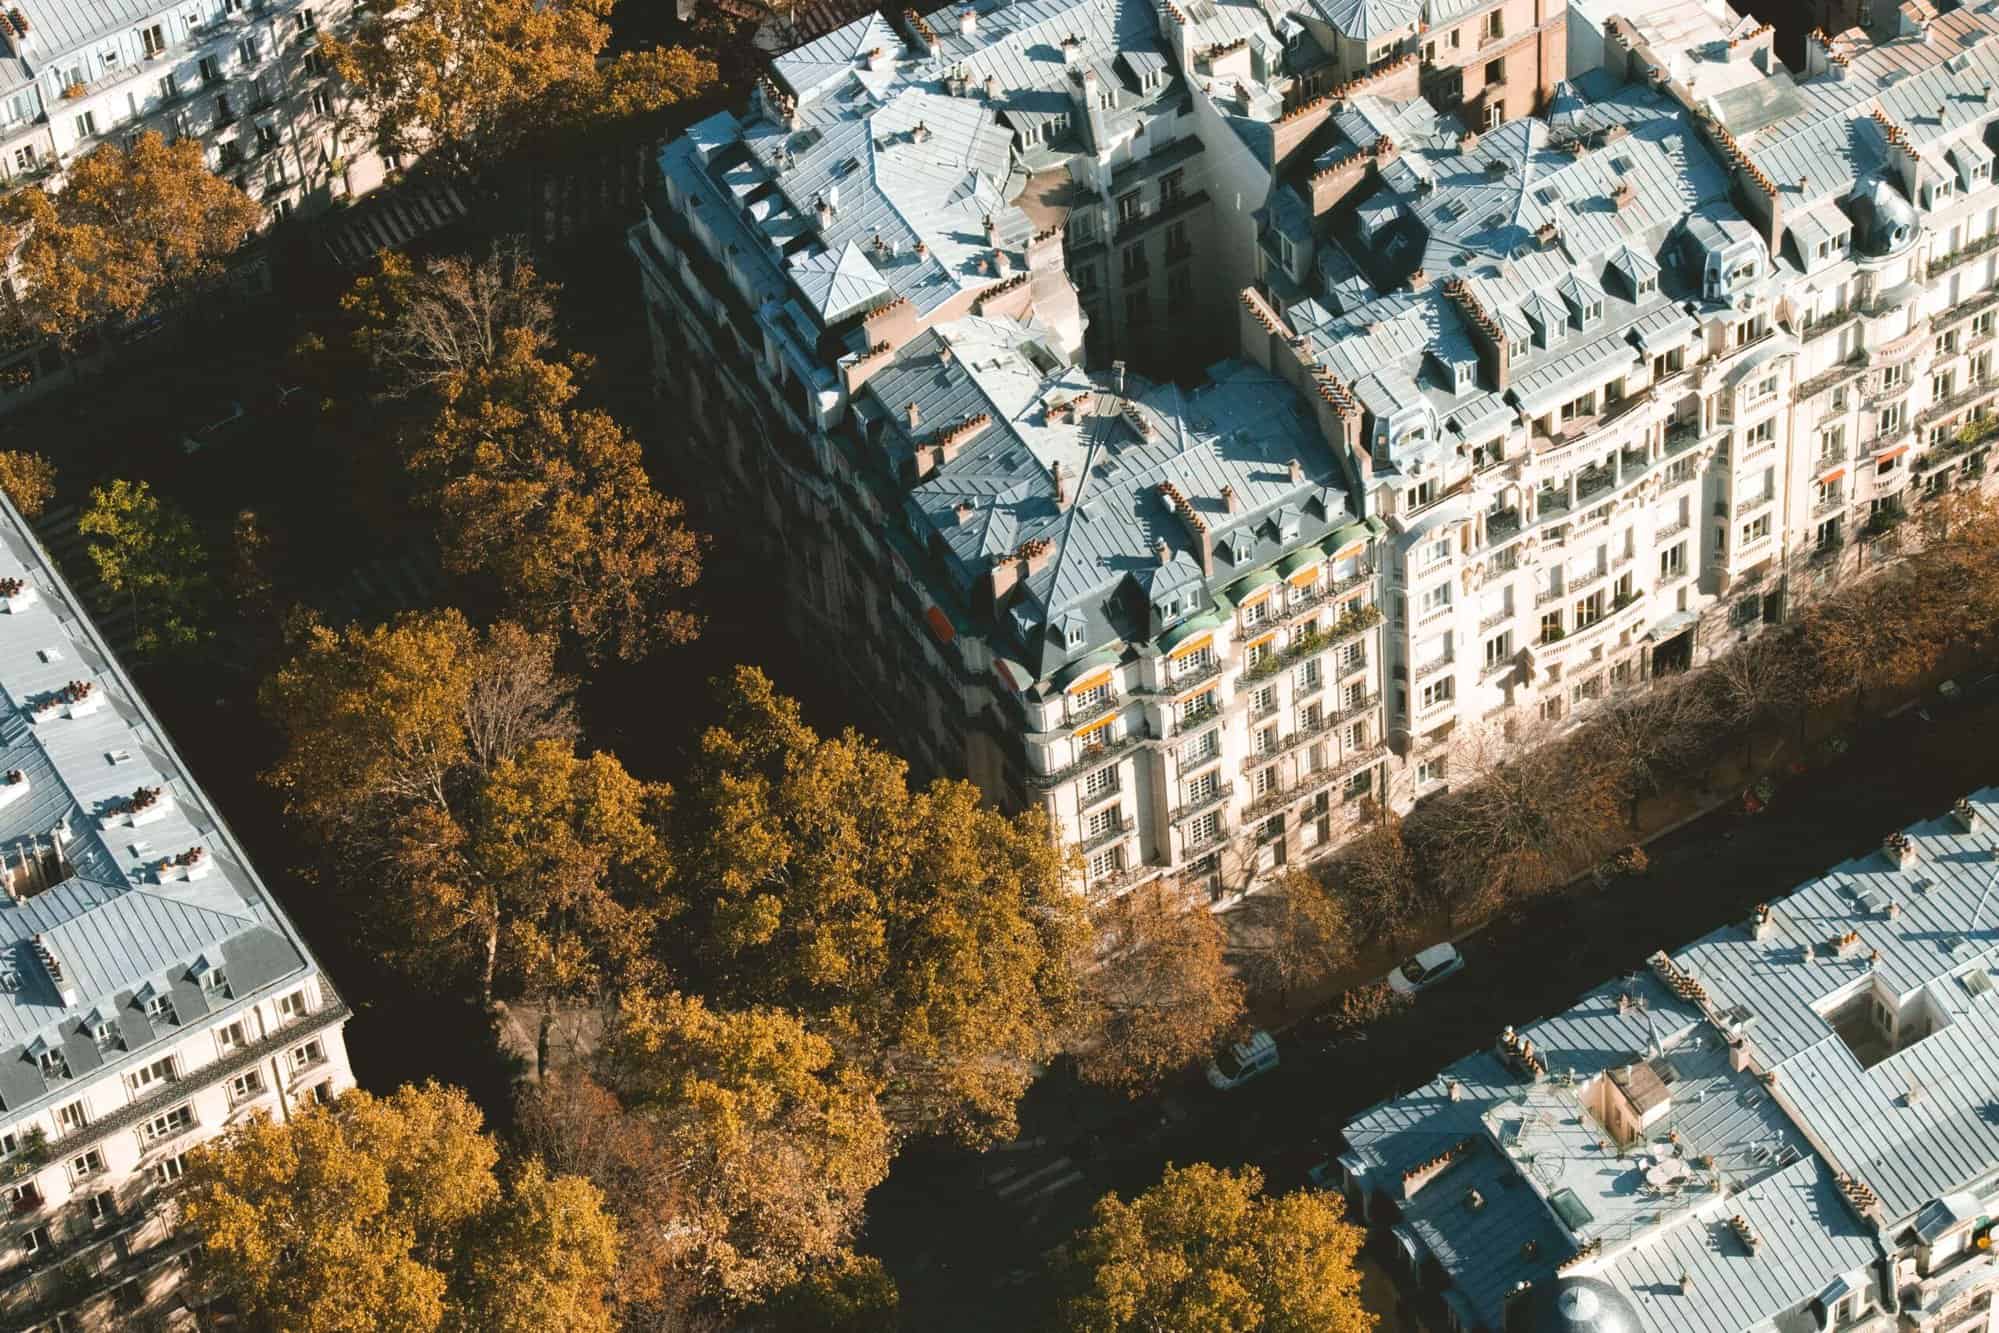 Aerial views of a Parisian street during autumn, overlooking trees and buildings, and the famous Parisian zinc rooftops.